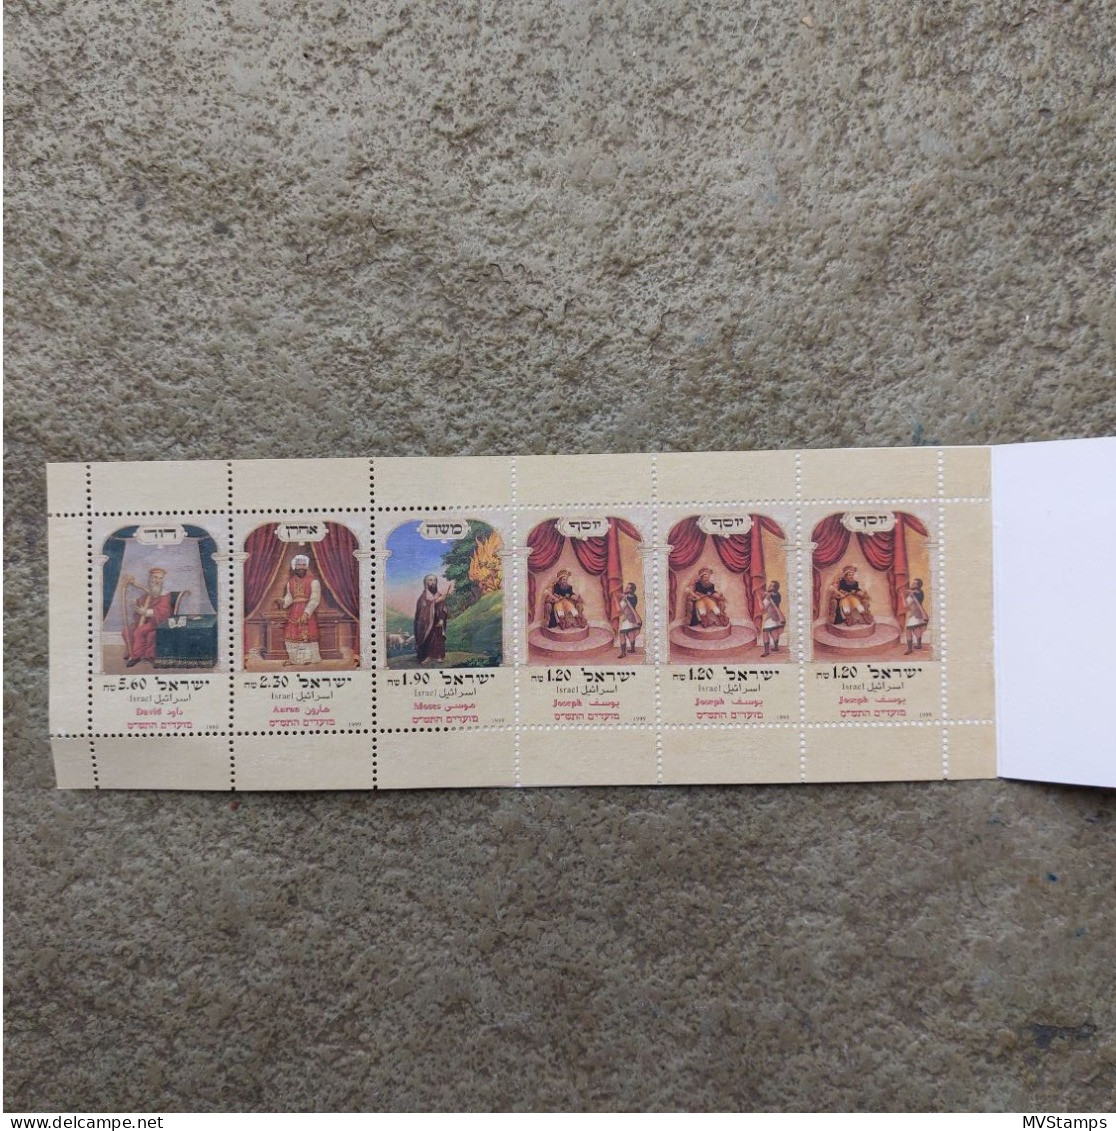 Israel 1999 Booklet Festival Stamps (Michel MH 34) Nice MNH - Booklets